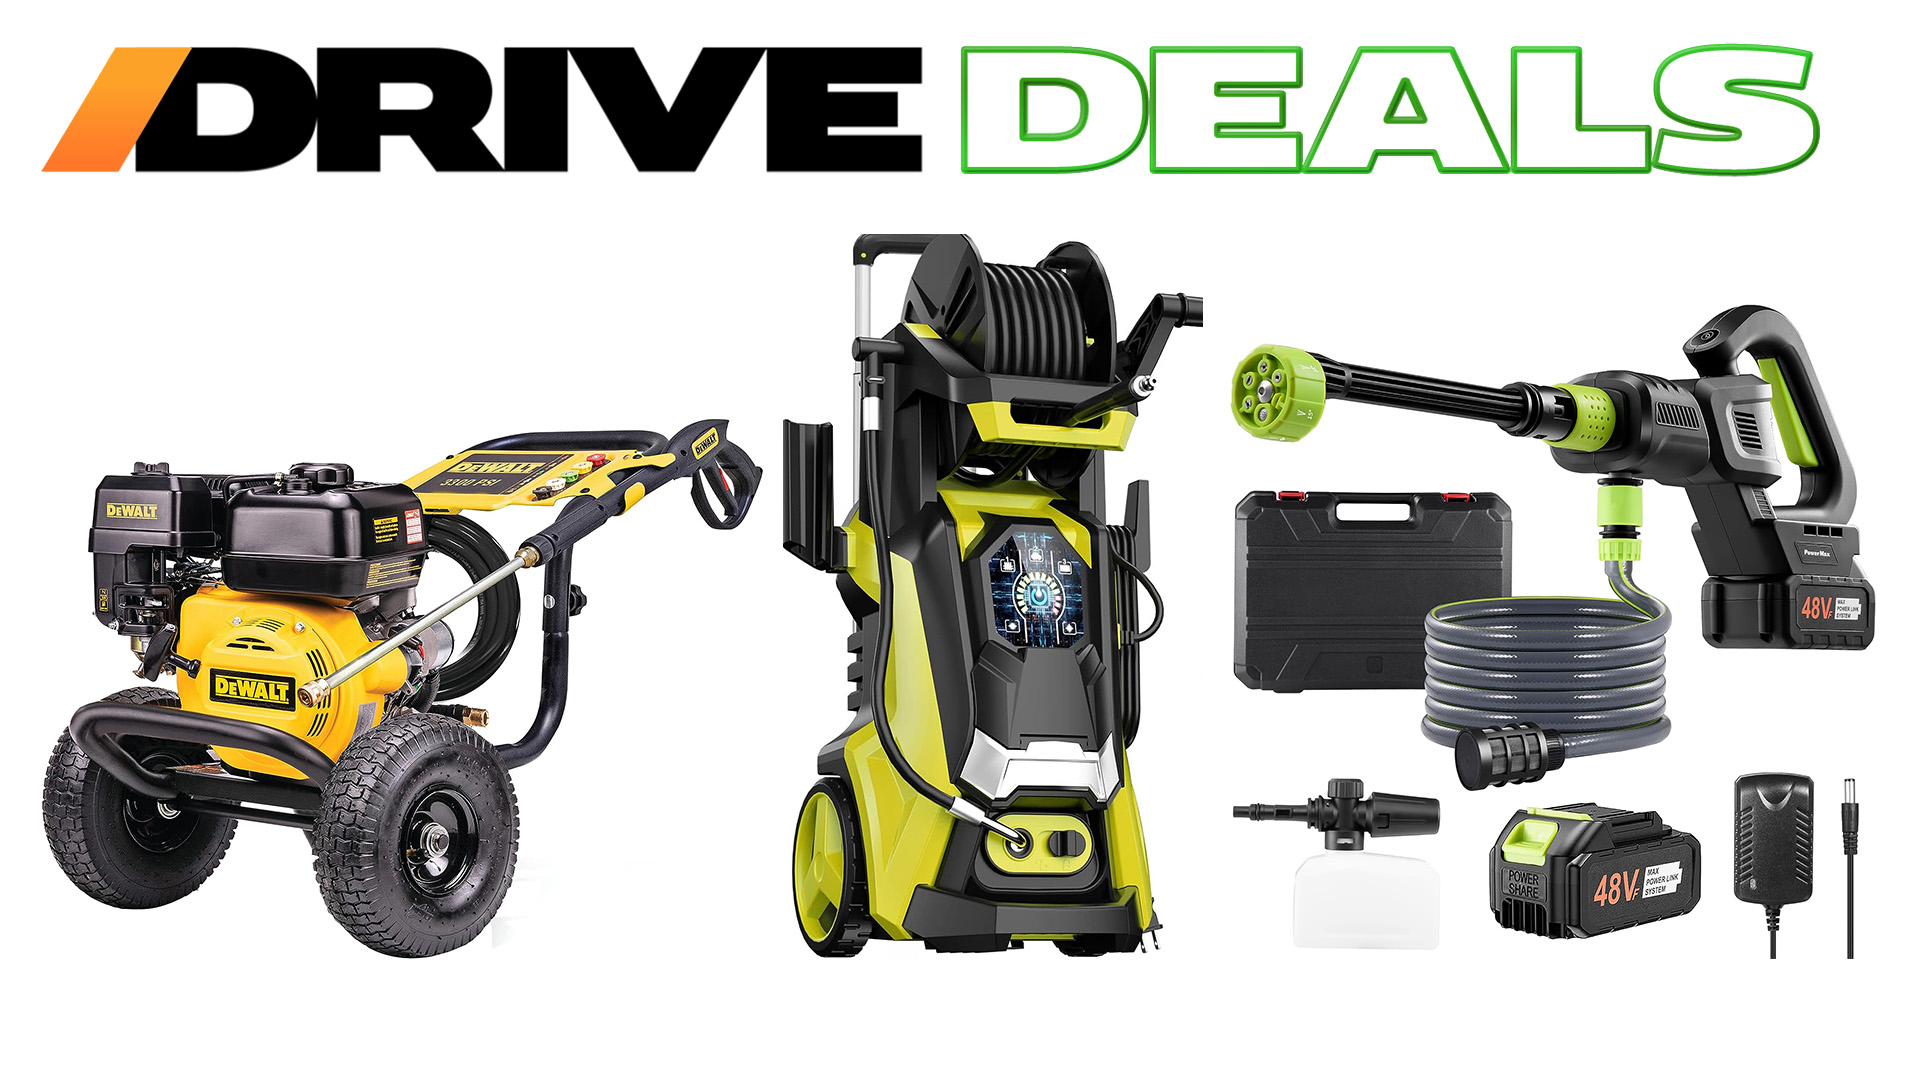 deals: Save on iPads, pressure washers and more